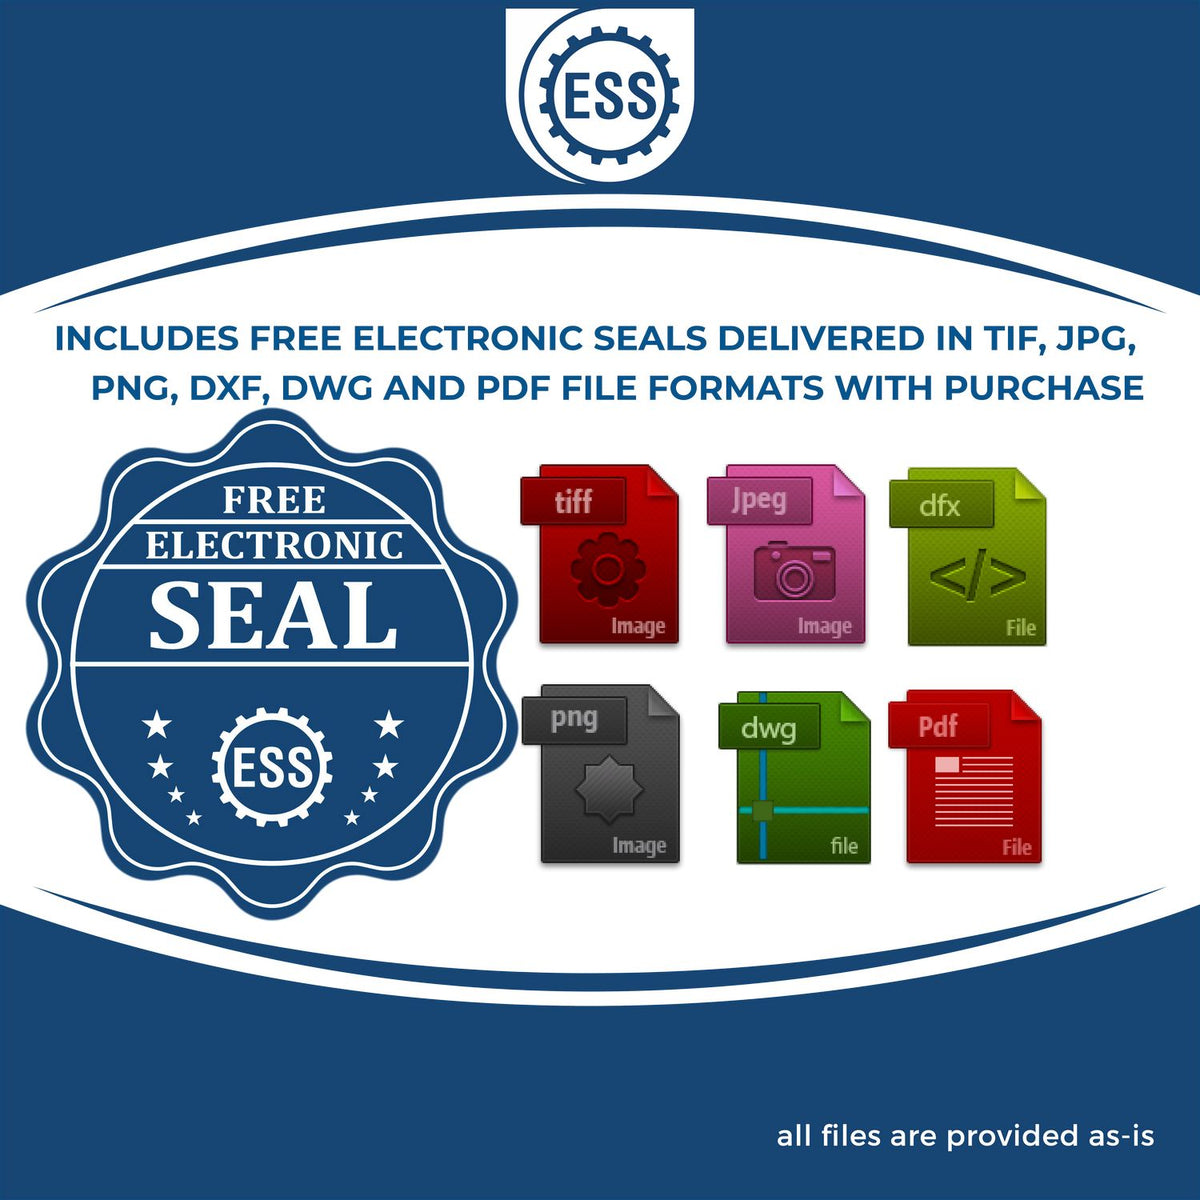 An infographic for the free electronic seal for the PSI Maine Notary Stamp illustrating the different file type icons such as DXF, DWG, TIF, JPG and PNG.